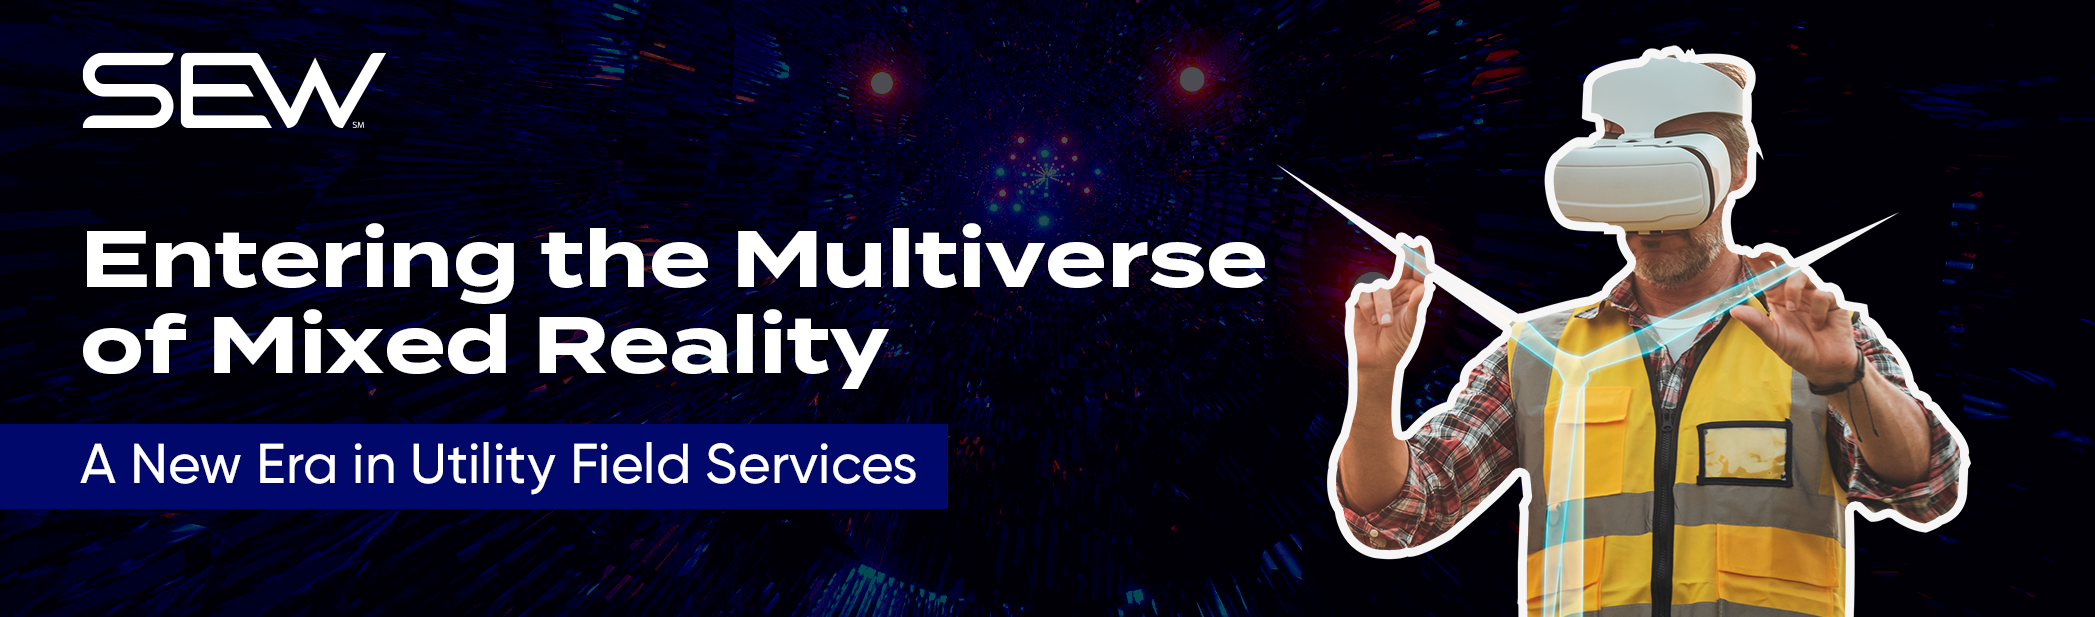 Entering the Multiverse of Mixed Reality: A New Era in Utility Field Services